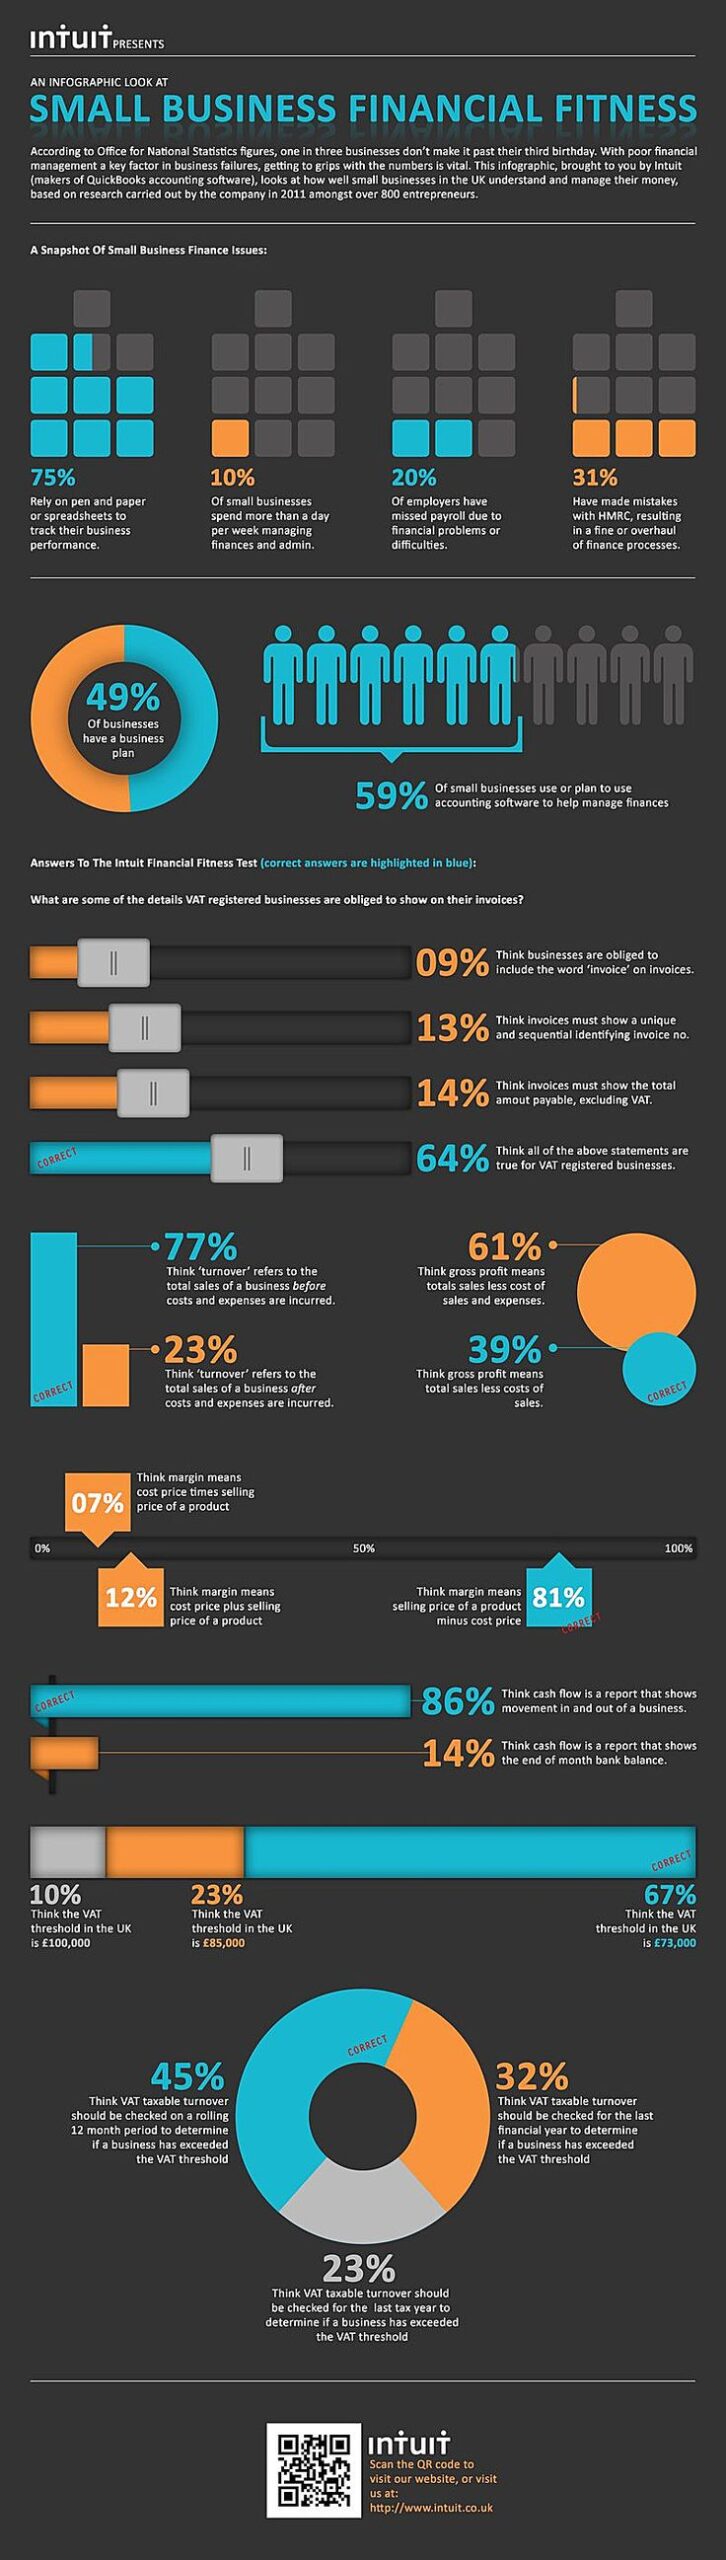 Small Business Predictions For 2013 (Infographic) - Business 2 Community